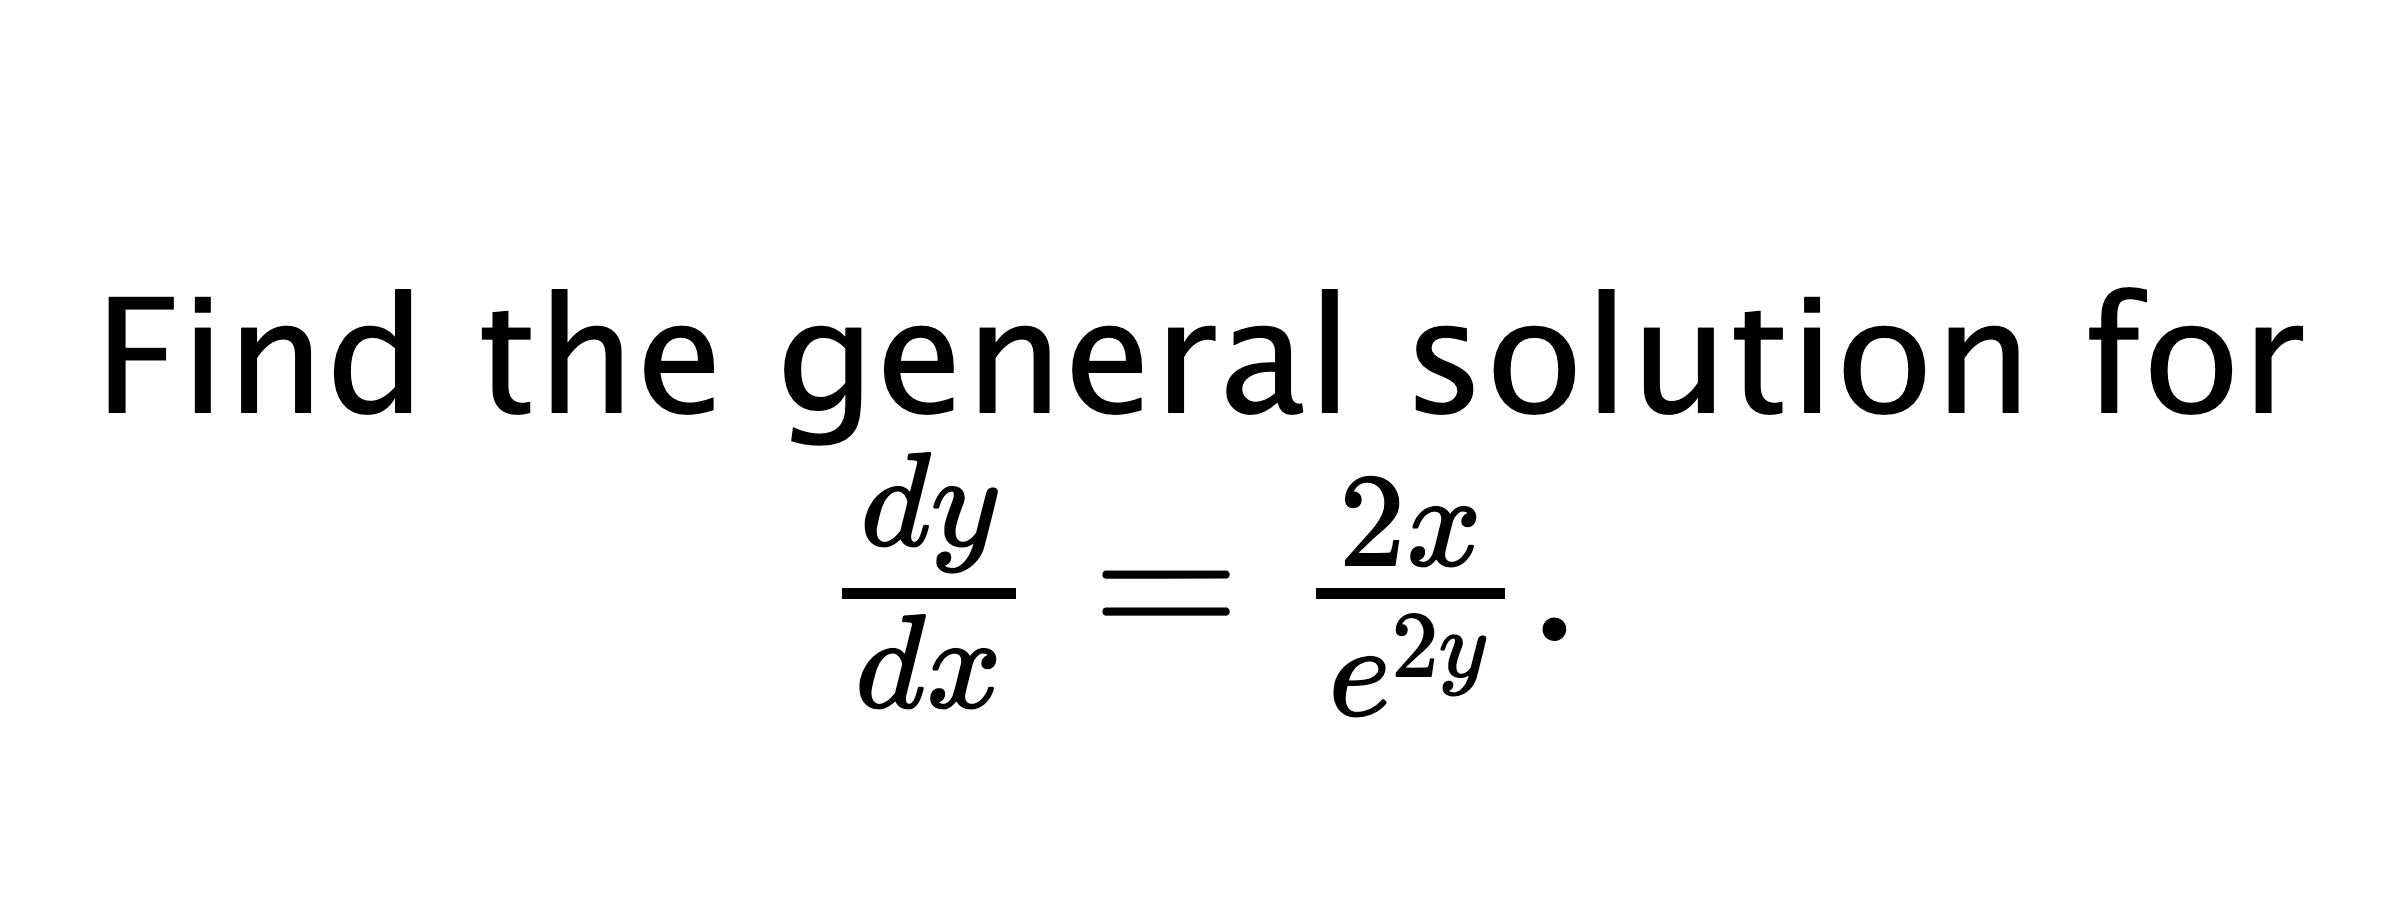  Find the general solution for $ \frac{dy}{dx}=\frac{2x}{e^{2y}}. $